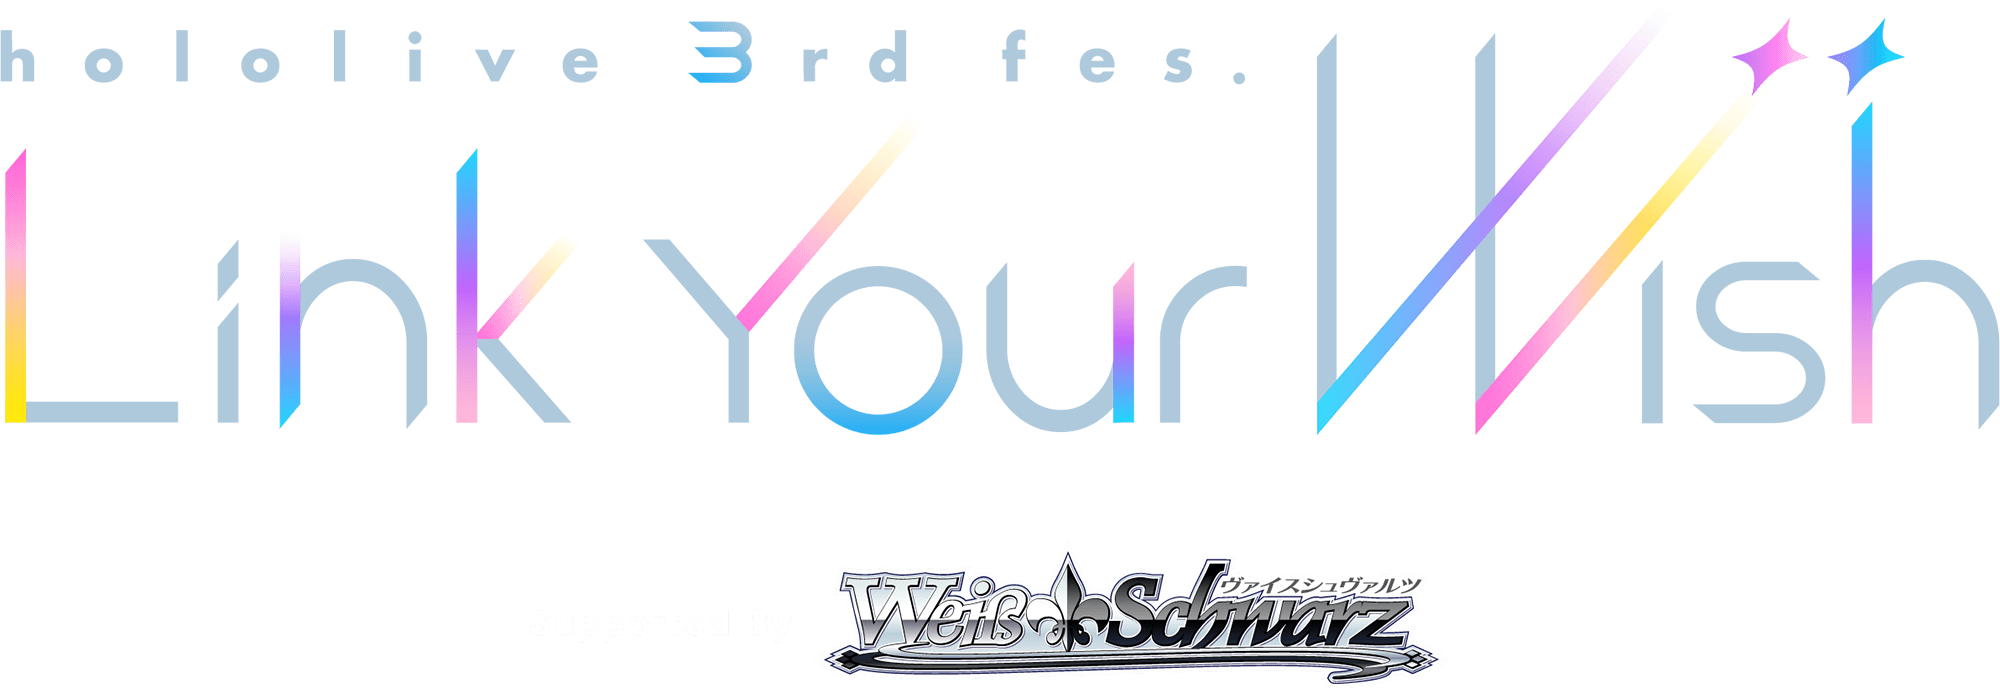 LIVE_INFO | hololive 3rd fes. Link Your Wish Supported By ヴァイス